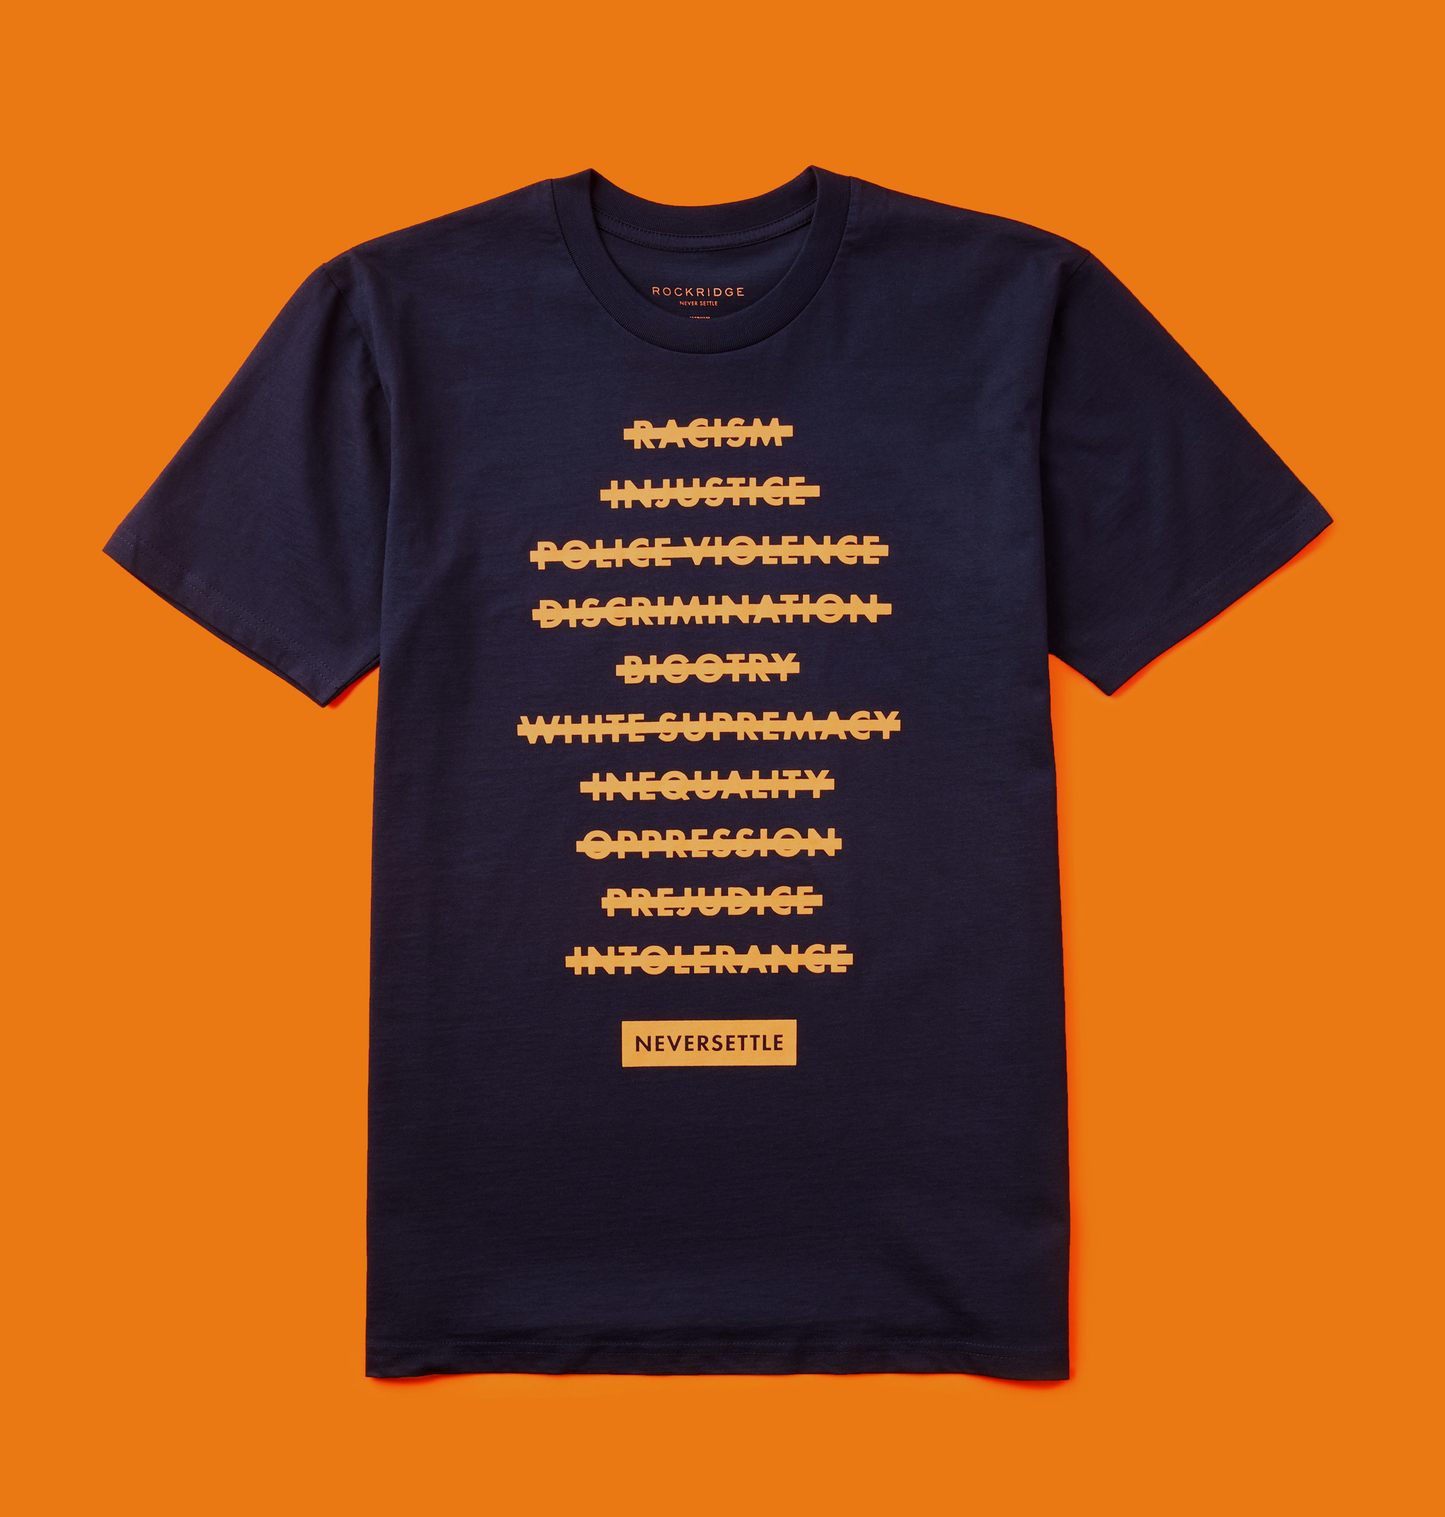 All proceeds from the purchase of this t-shirt will support organizations that are leading the fight for social justice and improve the lives of young people: Bayview Hunters Point and Black Futures Lab.